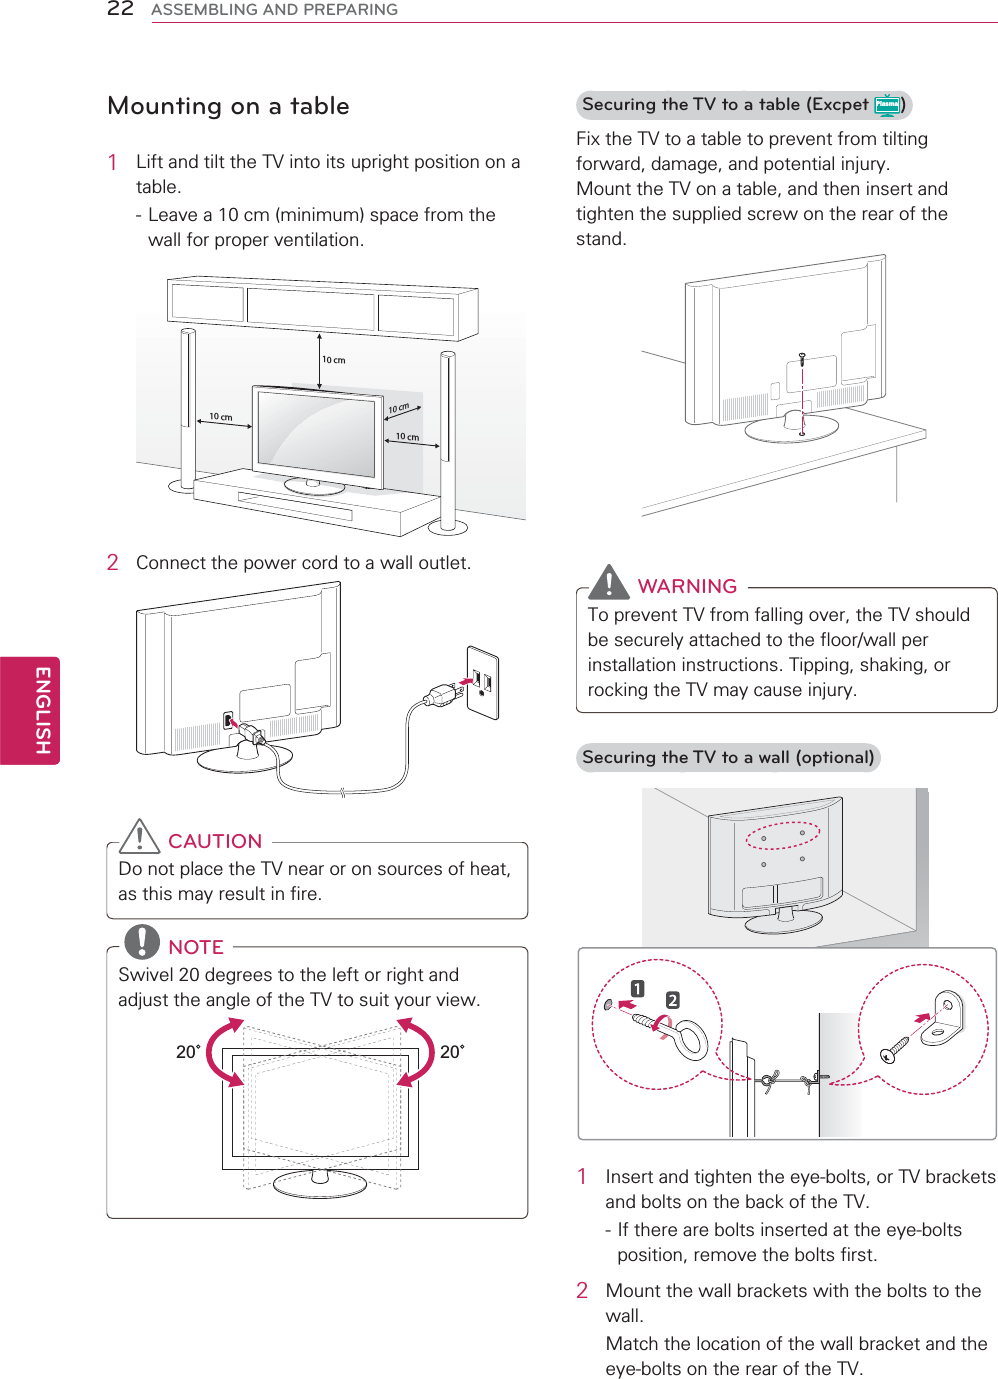 22ENGENGLISHASSEMBLING AND PREPARINGMounting on a table1Lift and tilt the TV into its upright position on a table.- Leave a 10 cm (minimum) space from the wall for proper ventilation.10 cm10 cm10 cm10 cm2Connect the power cord to a wall outlet.CAUTIONDo not place the TV near or on sources of heat, as this may result in fire.NOTESwivel 20 degrees to the left or right and adjust the angle of the TV to suit your view.2020Securing the TV to a table (Excpet Plasma)Fix the TV to a table to prevent from tilting forward, damage, and potential injury.Mount the TV on a table, and then insert and tighten the supplied screw on the rear of the stand. WARNINGTo prevent TV from falling over, the TV should be securely attached to the floor/wall per installation instructions. Tipping, shaking, or rocking the TV may cause injury.Securing the TV to a wall (optional)1Insert and tighten the eye-bolts, or TV brackets and bolts on the back of the TV.- If there are bolts inserted at the eye-bolts position, remove the bolts first.2Mount the wall brackets with the bolts to the wall.Match the location of the wall bracket and the eye-bolts on the rear of the TV.